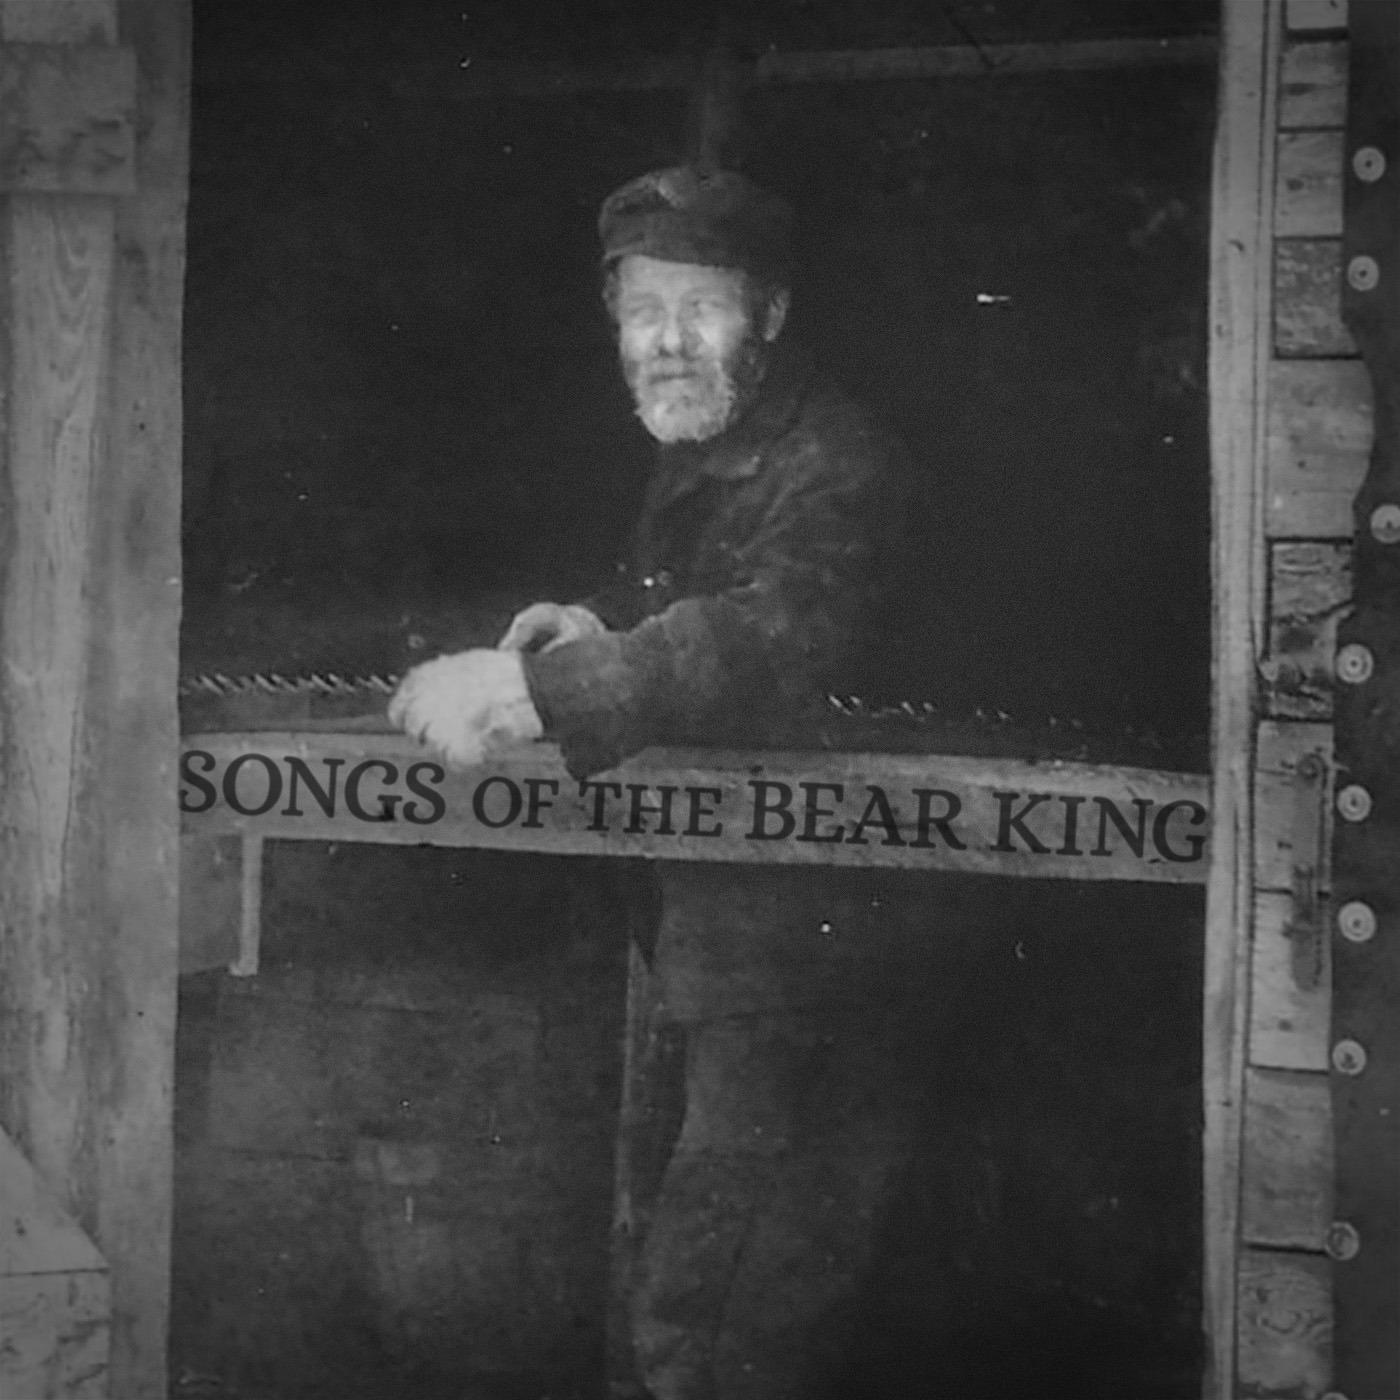 Songs of the Bear King